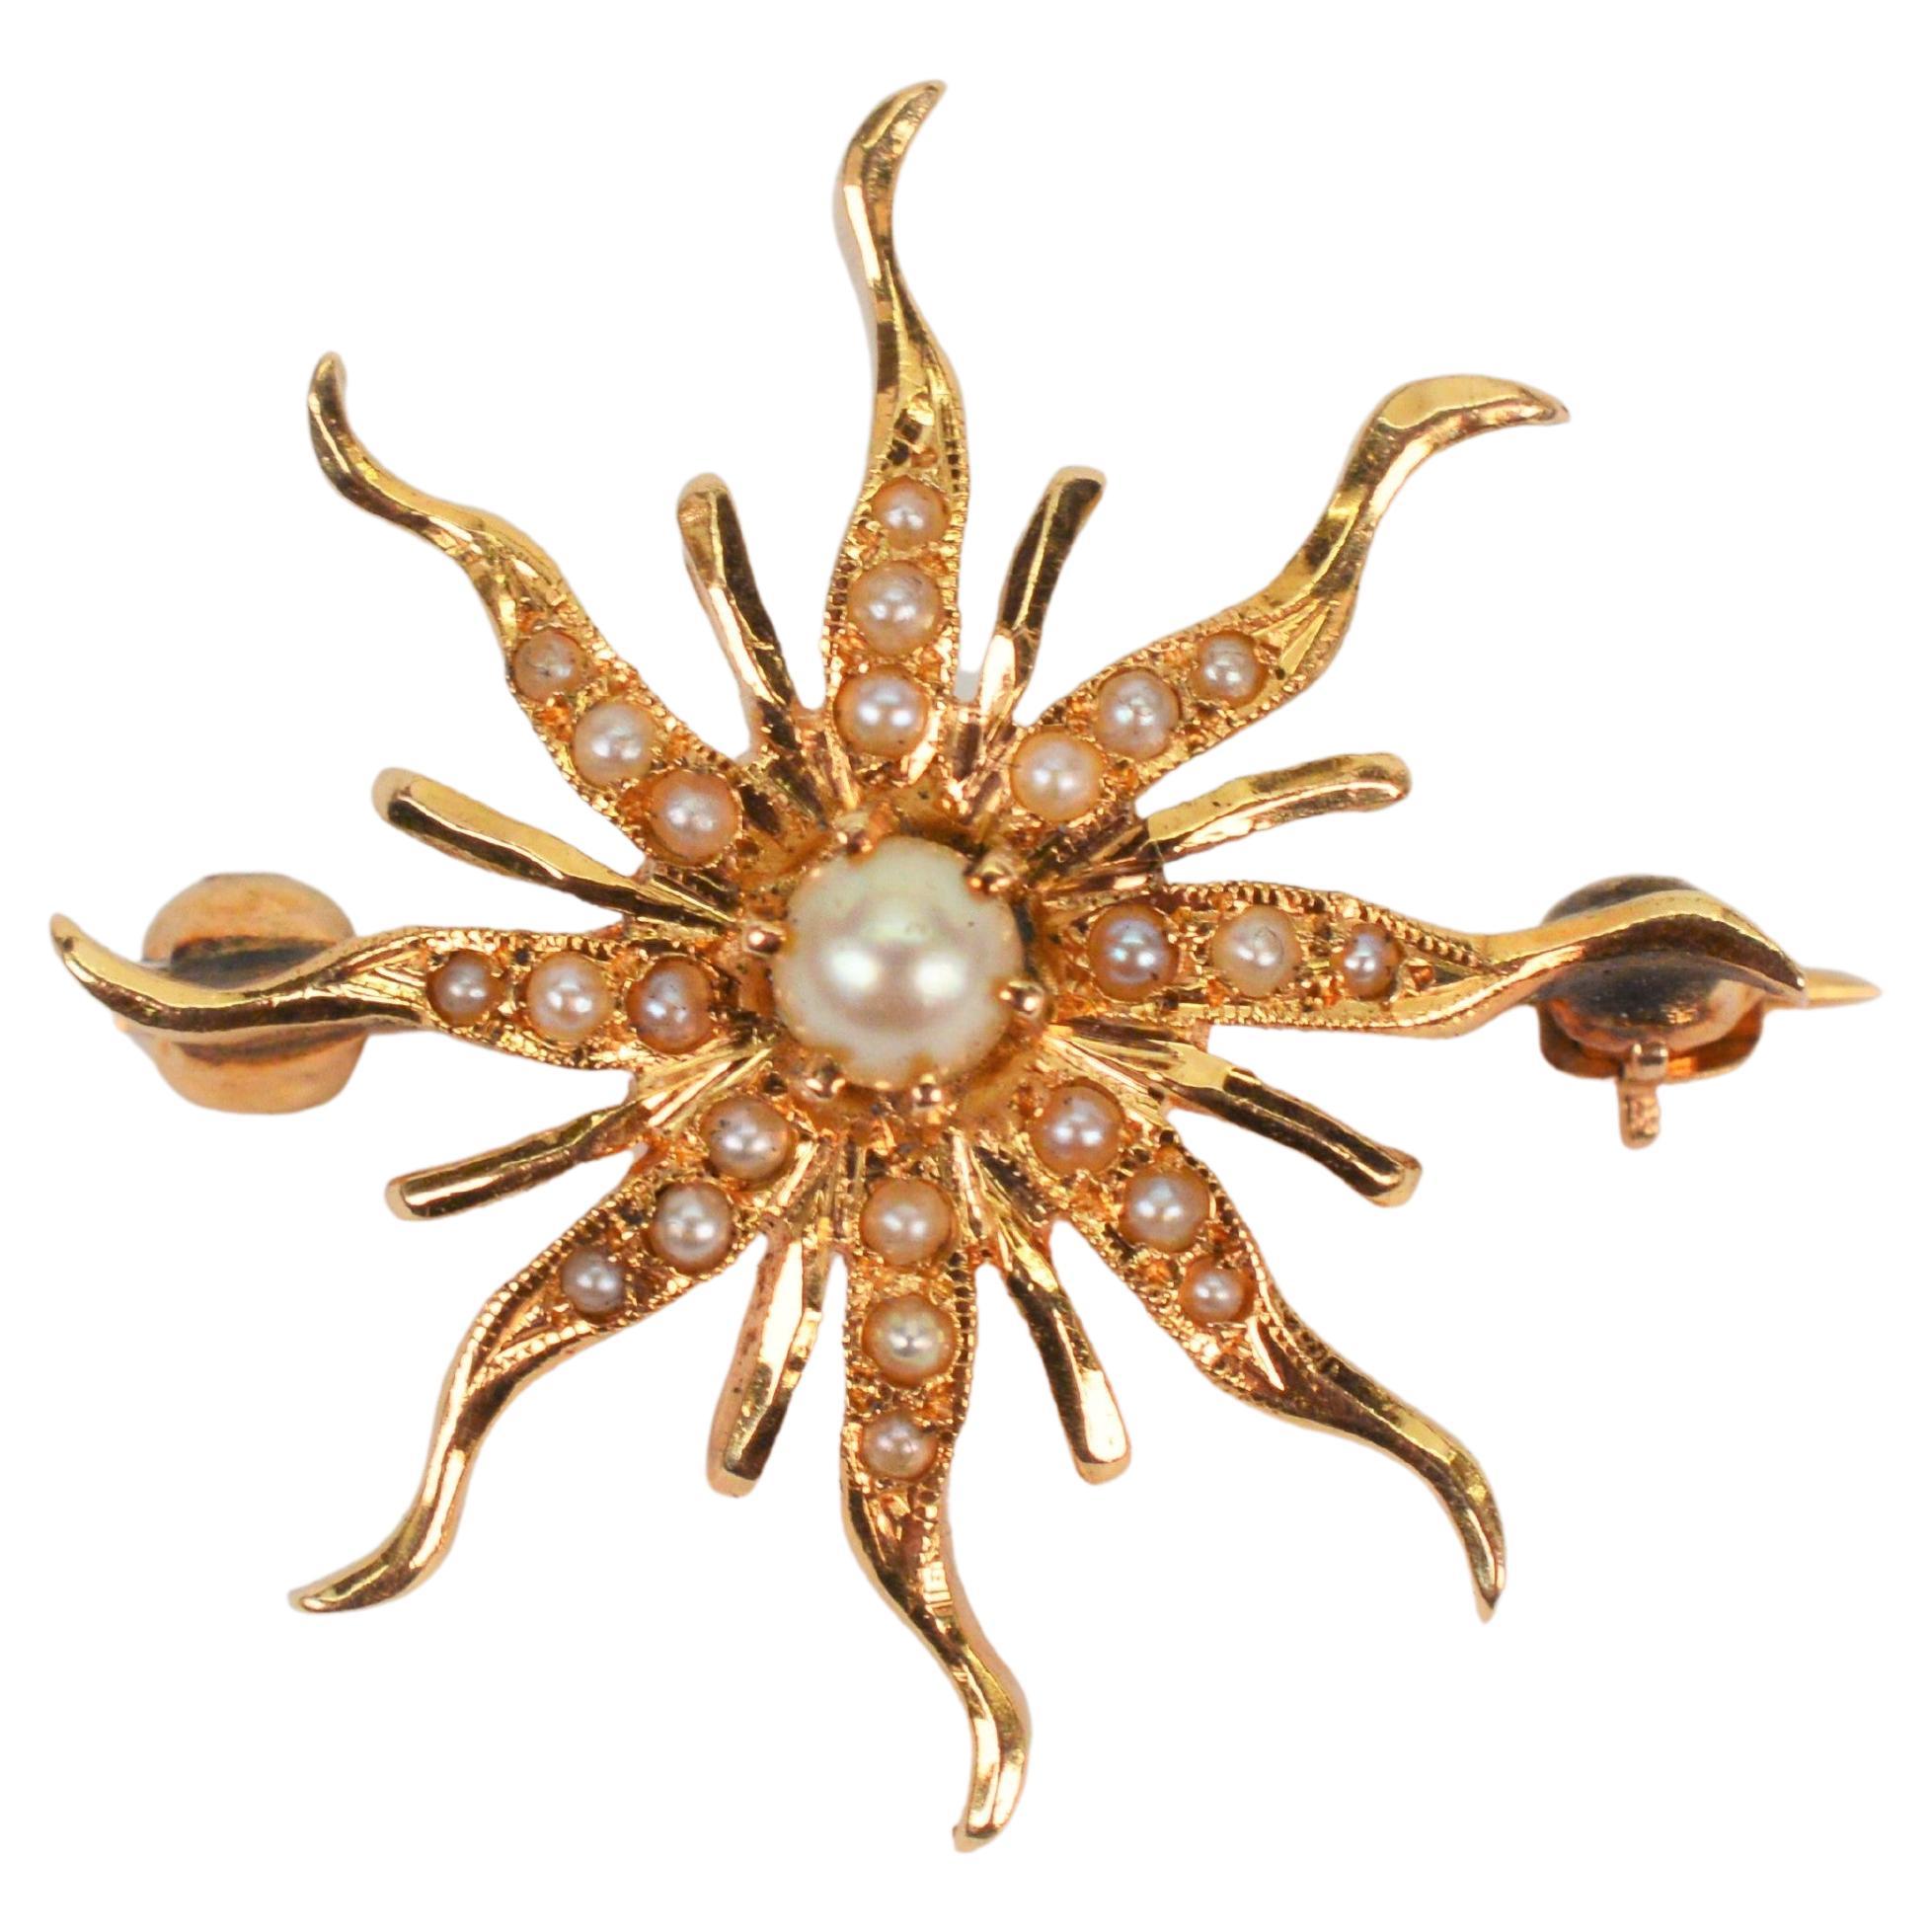 Vintage Solar Brooch Pendant Pin Charm 14K Yellow Gold Necklace w Pearl Accents 